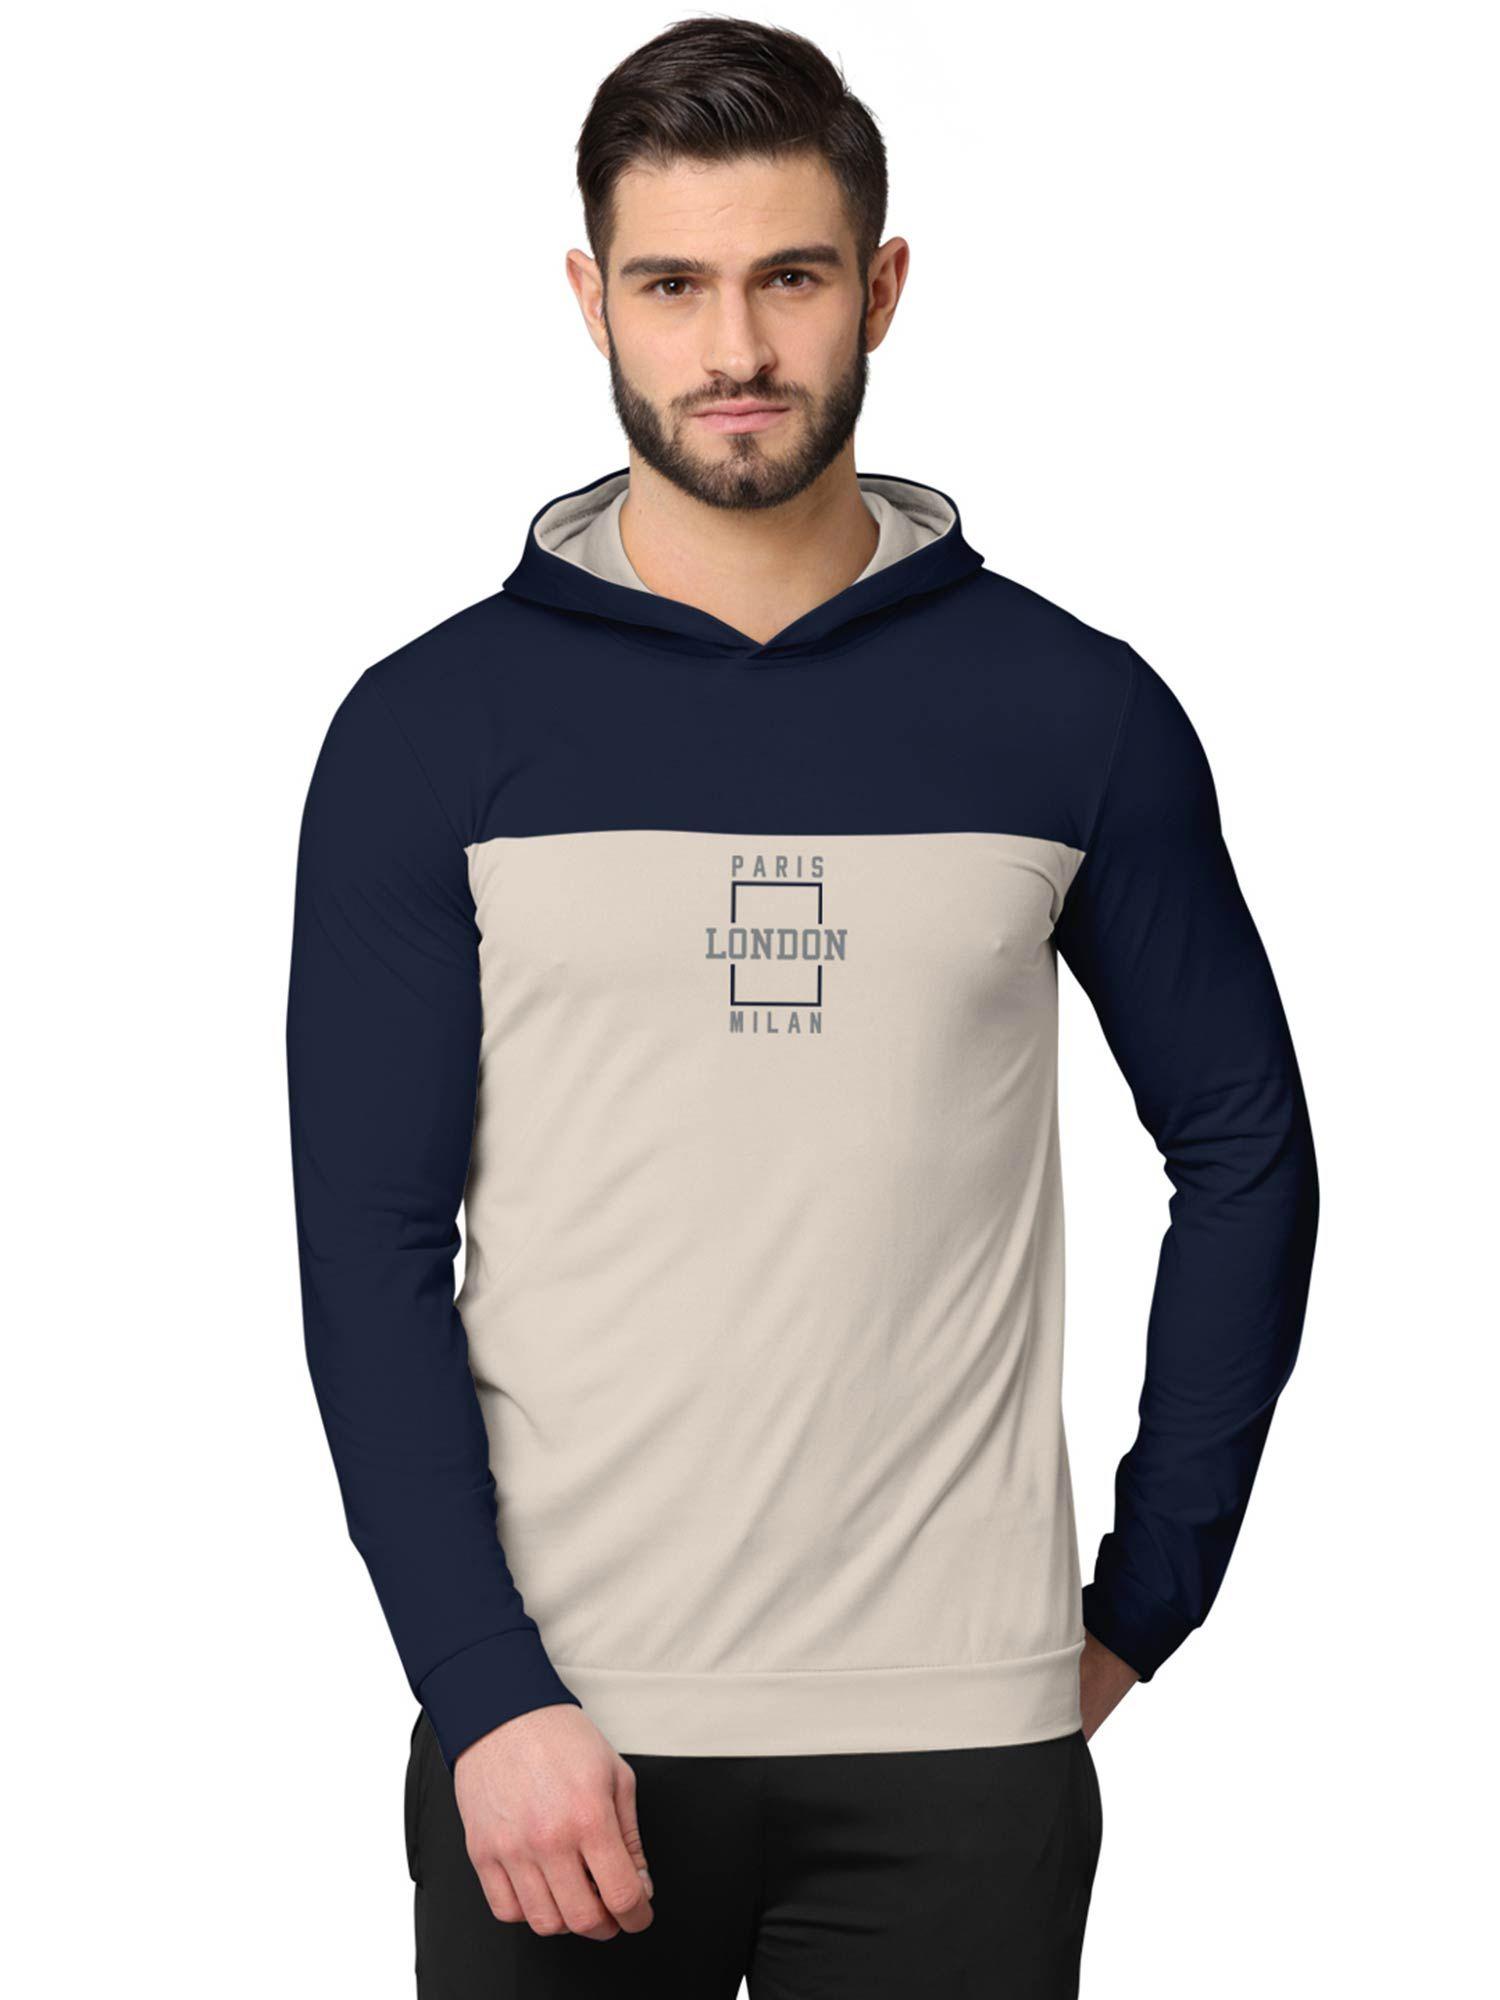 colorblock full sleeve hooded sweatshirts for men navy blue and beige